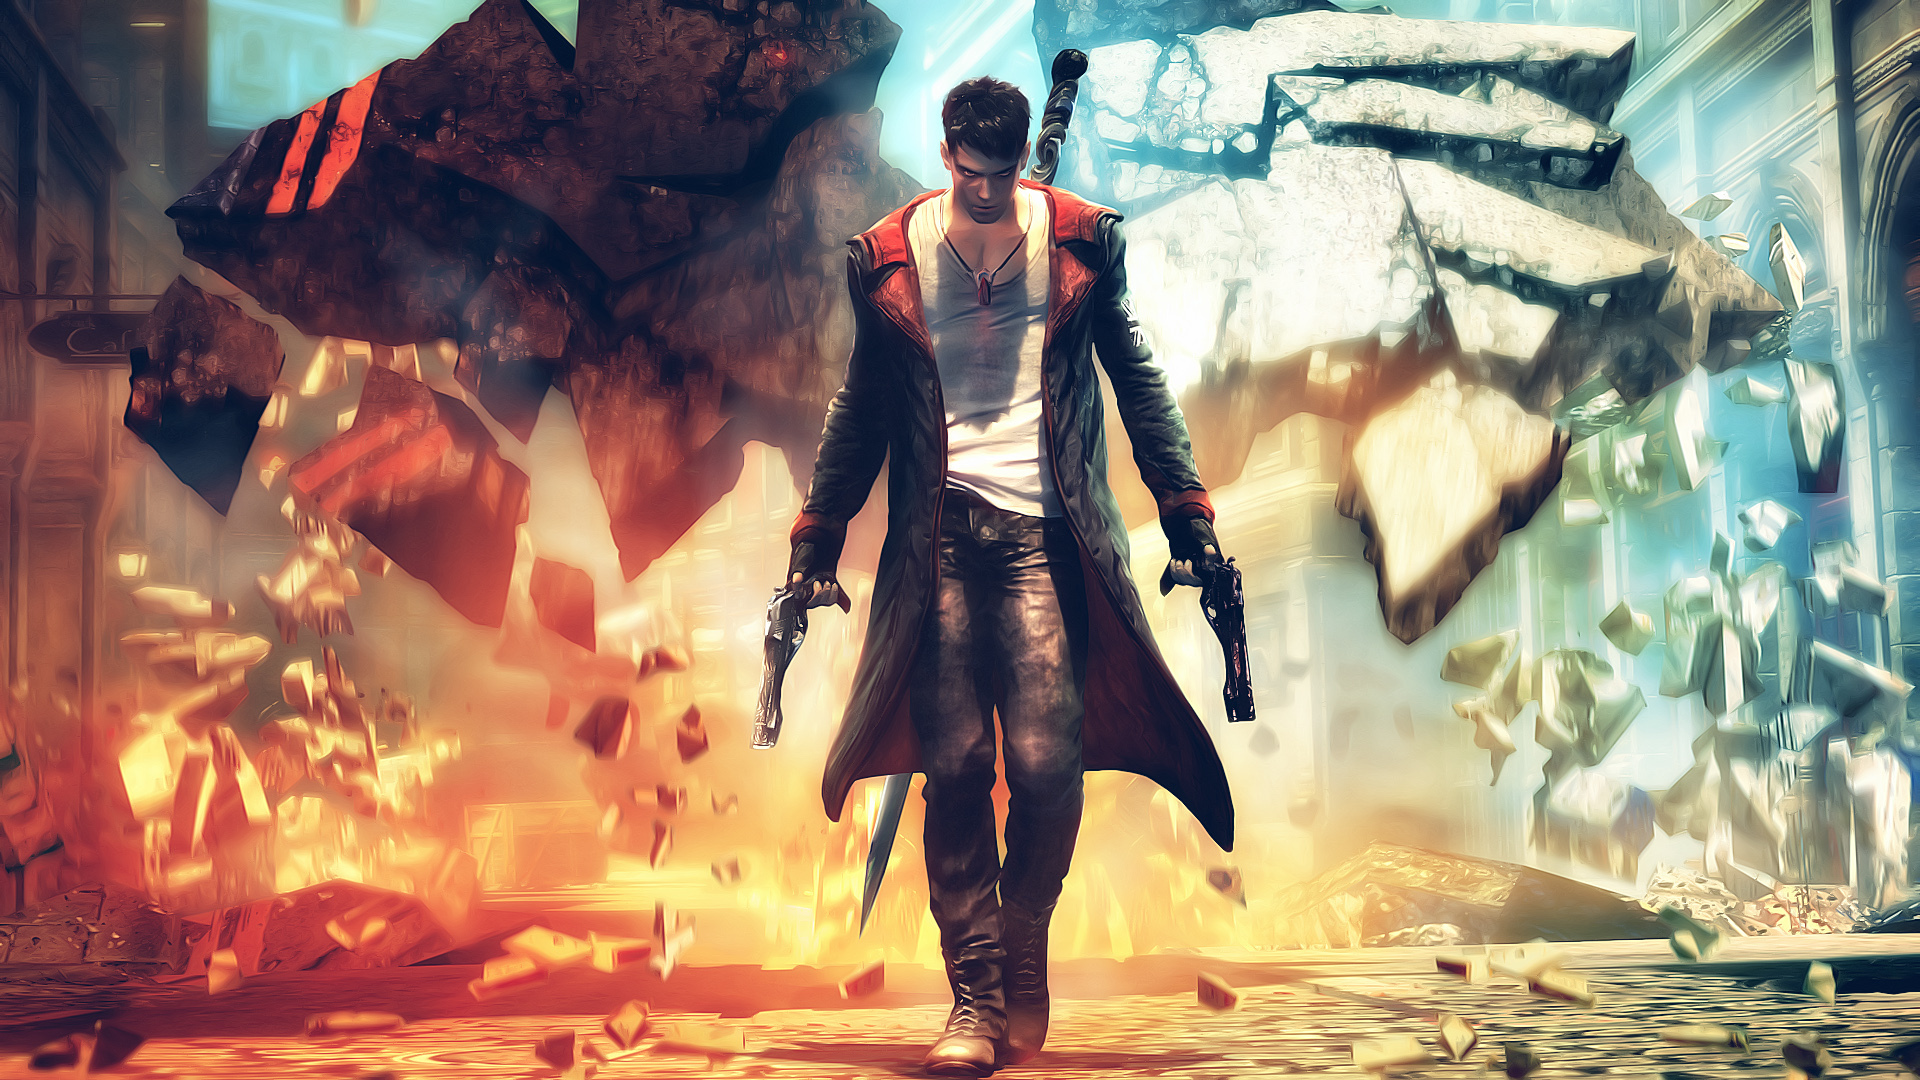 dmc: devil may cry, video game, devil may cry Full HD